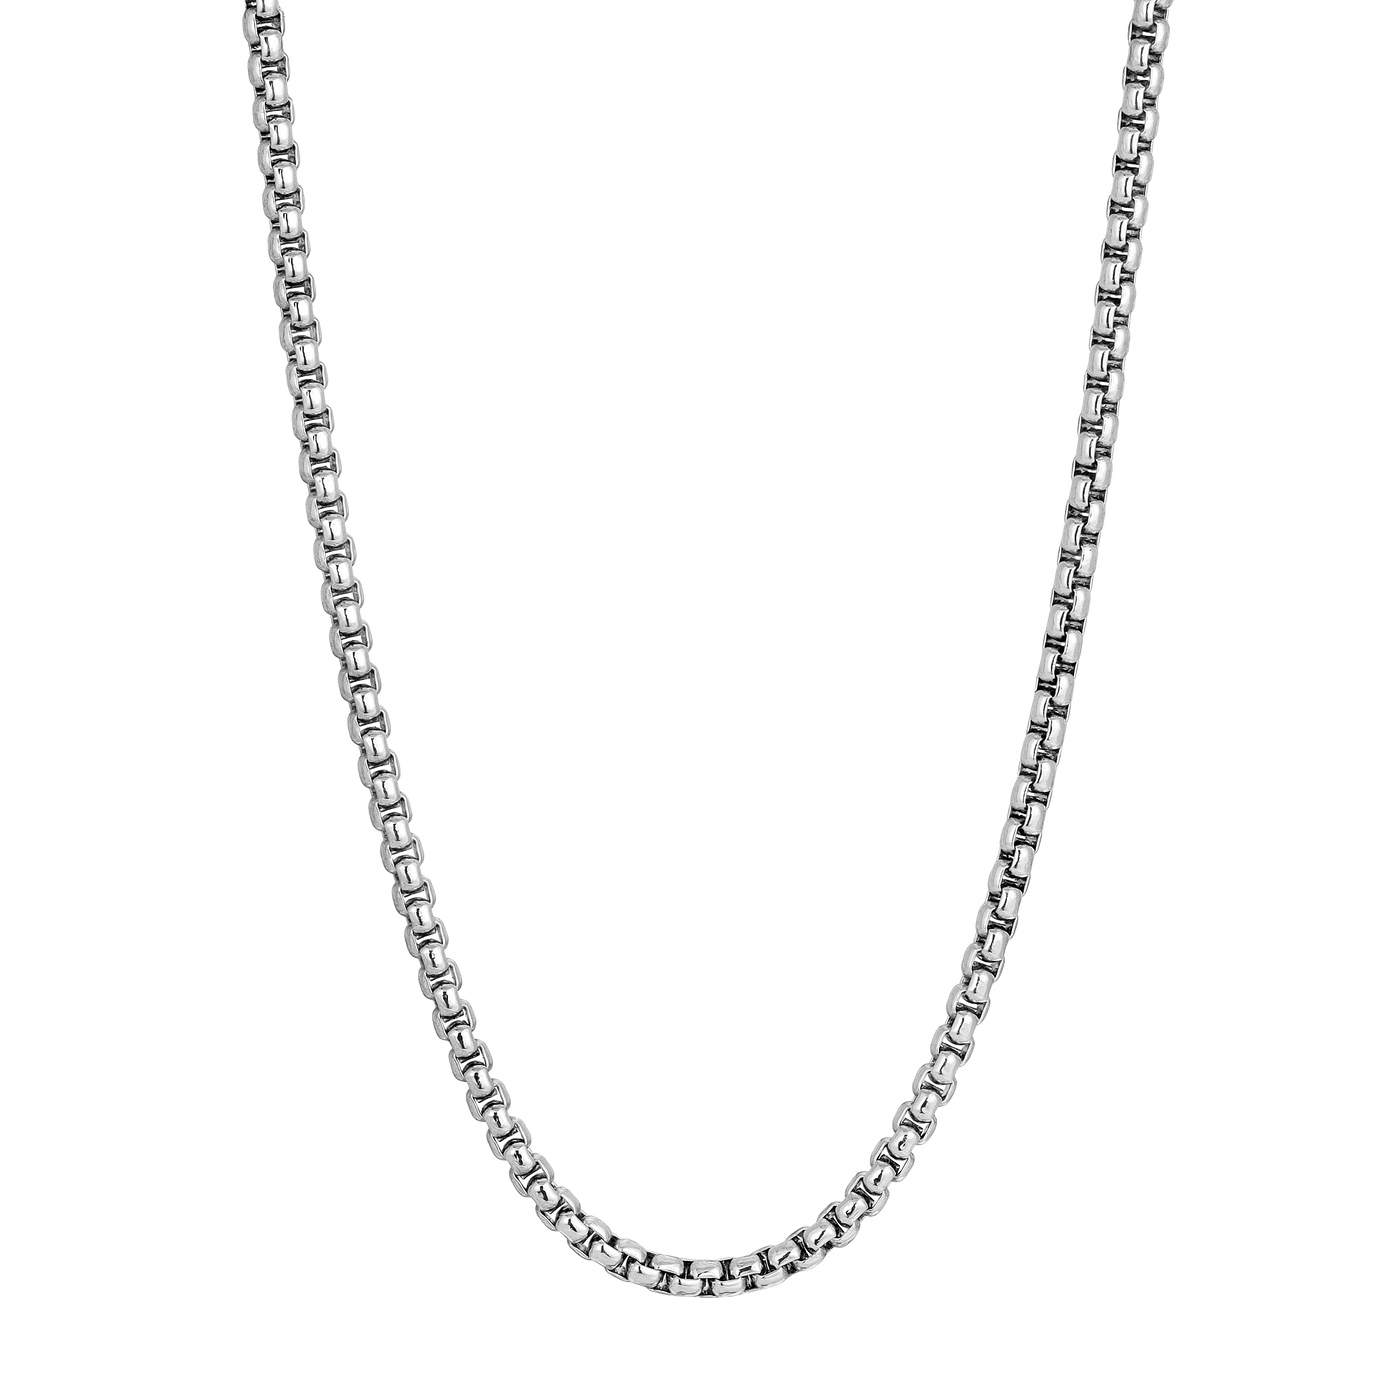 Silver Oxidized 31" Chain Necklace